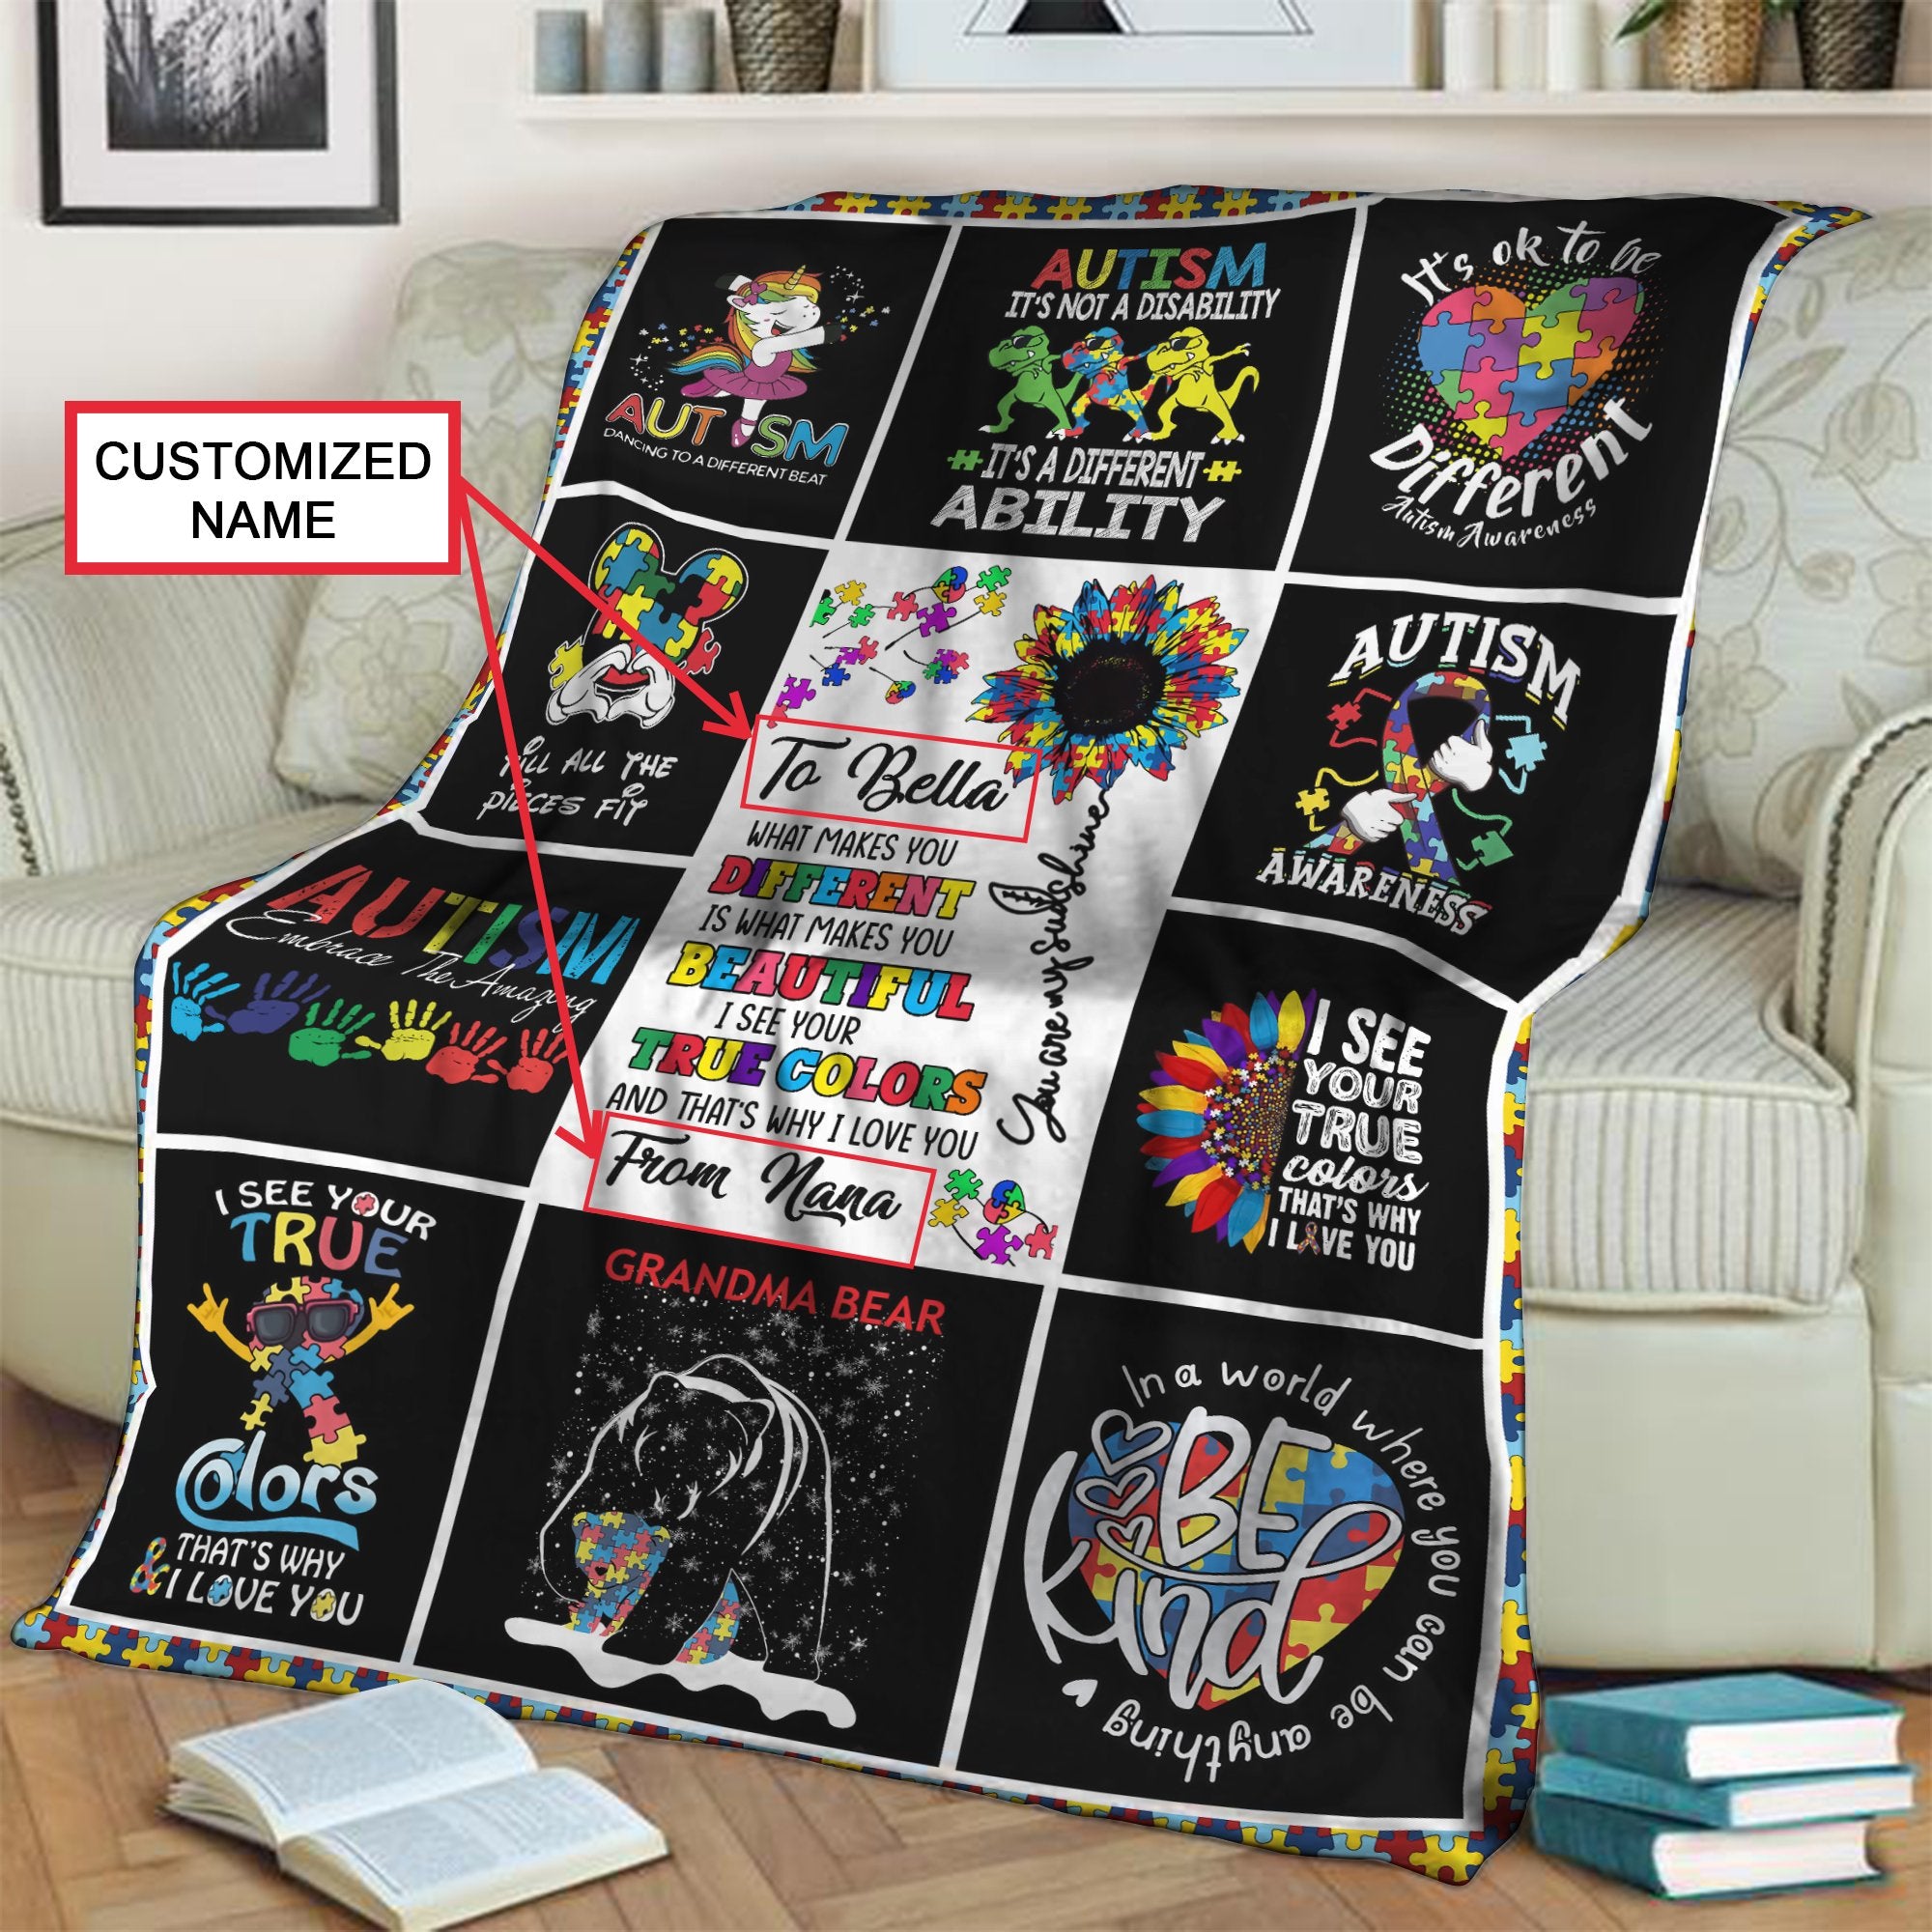 Different - Beautiful- True Colors 3D Throw Blanket